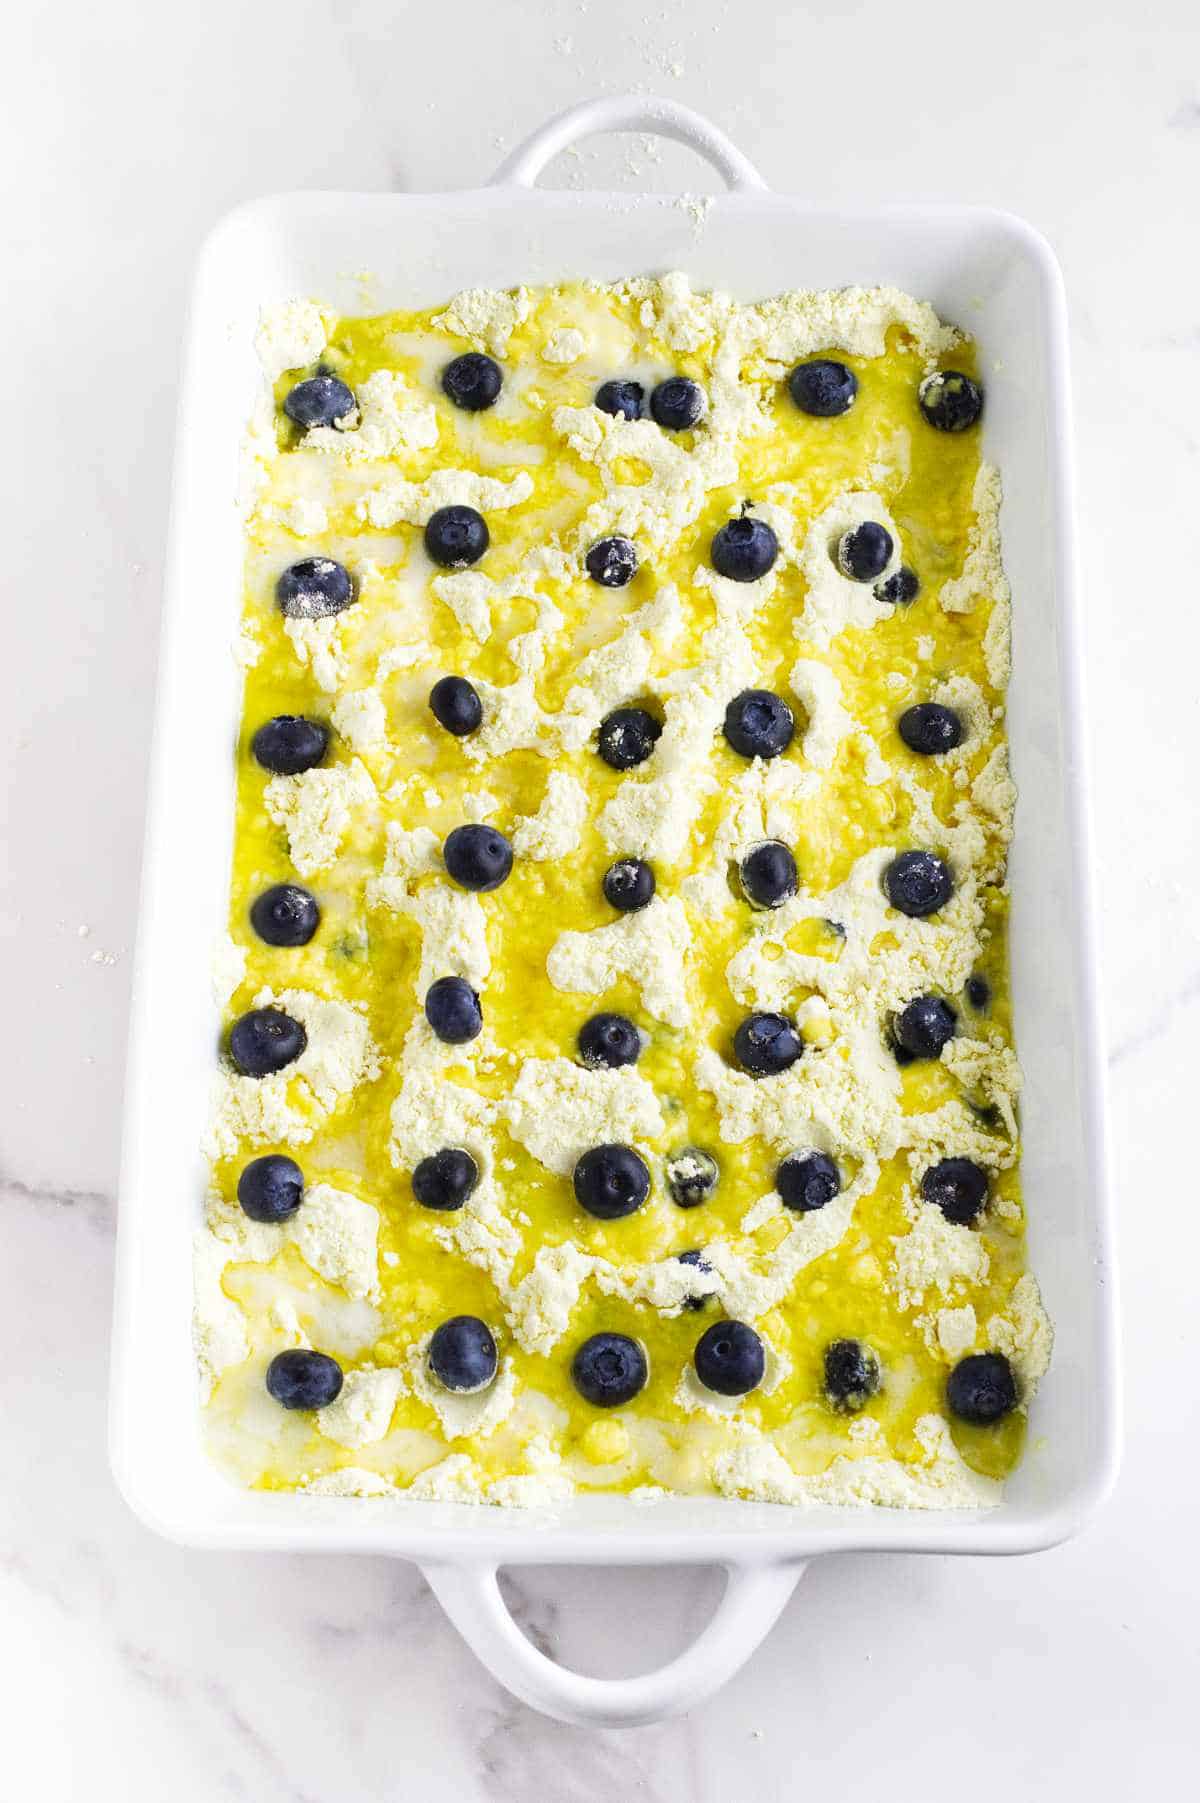 melted butter drizzled over cake mix and fresh blueberries dotting the top.